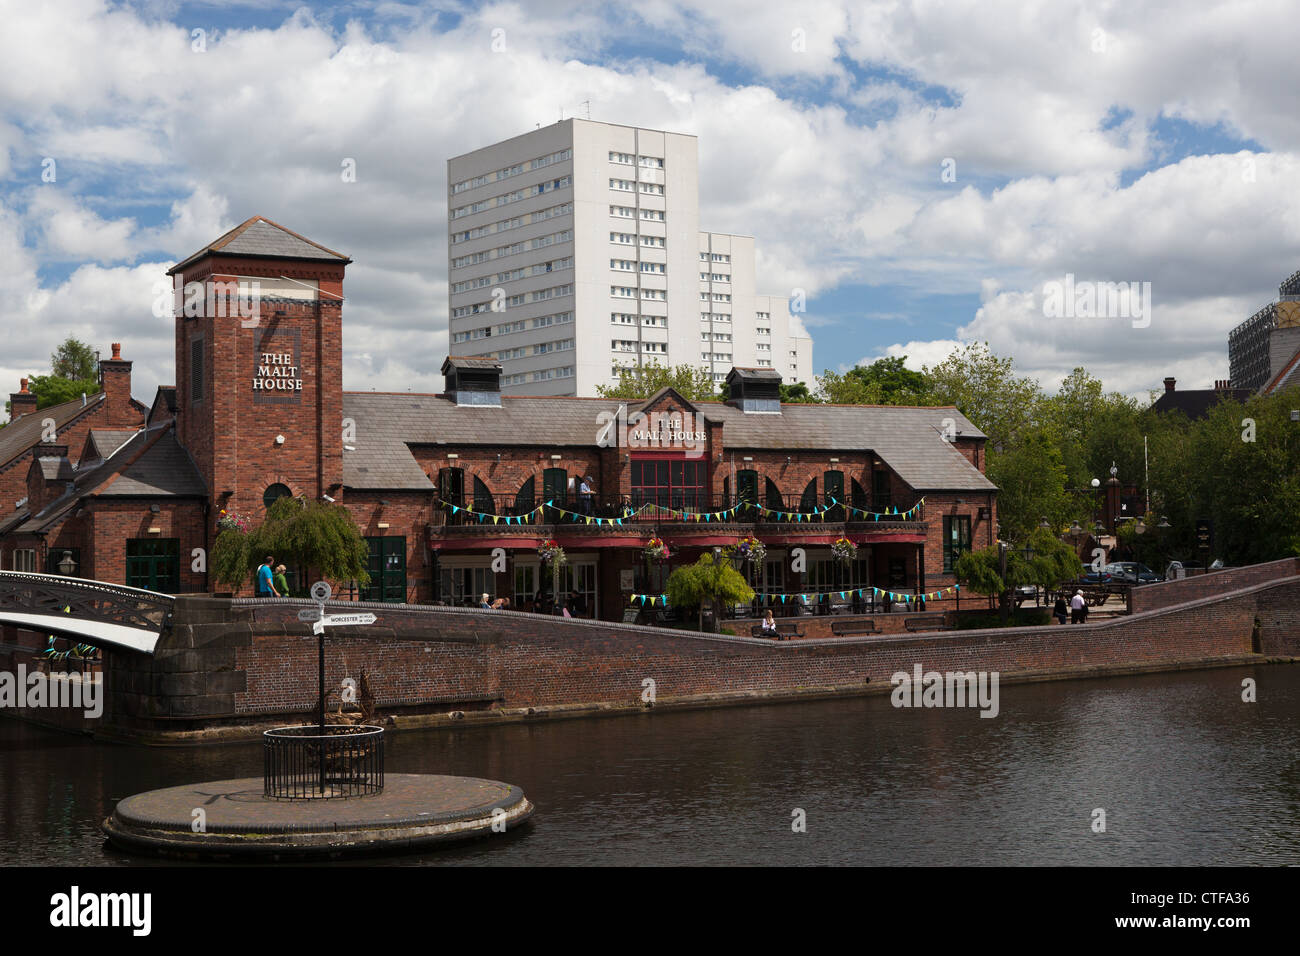 The Malt House pub on the canalside in Birmingham UK. President Bill Clinton had a drink here during a visit to the city. Stock Photo